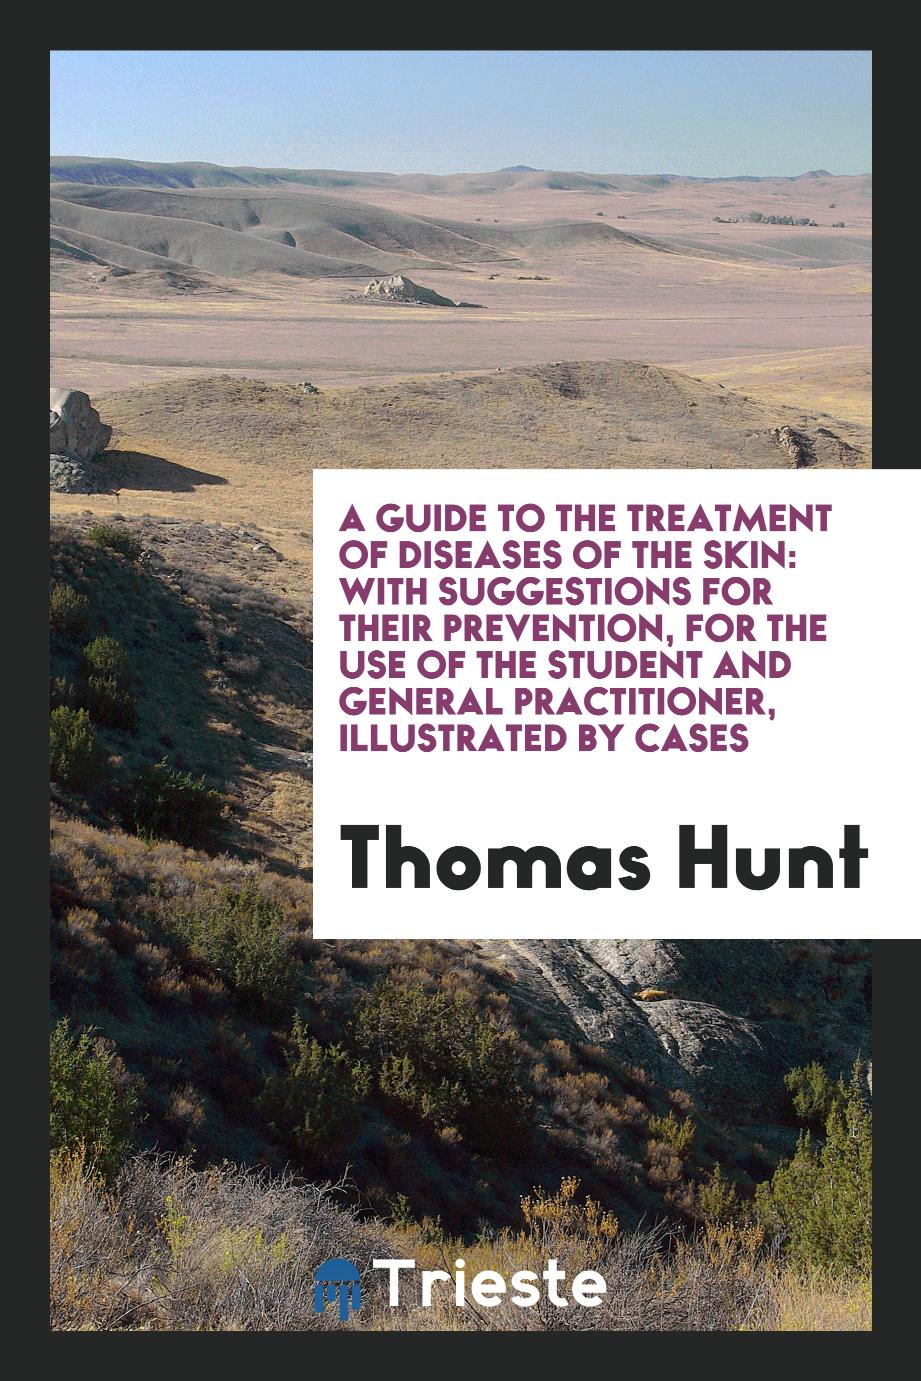 A guide to the treatment of diseases of the skin: with suggestions for their prevention, for the use of the student and general practitioner, illustrated by cases